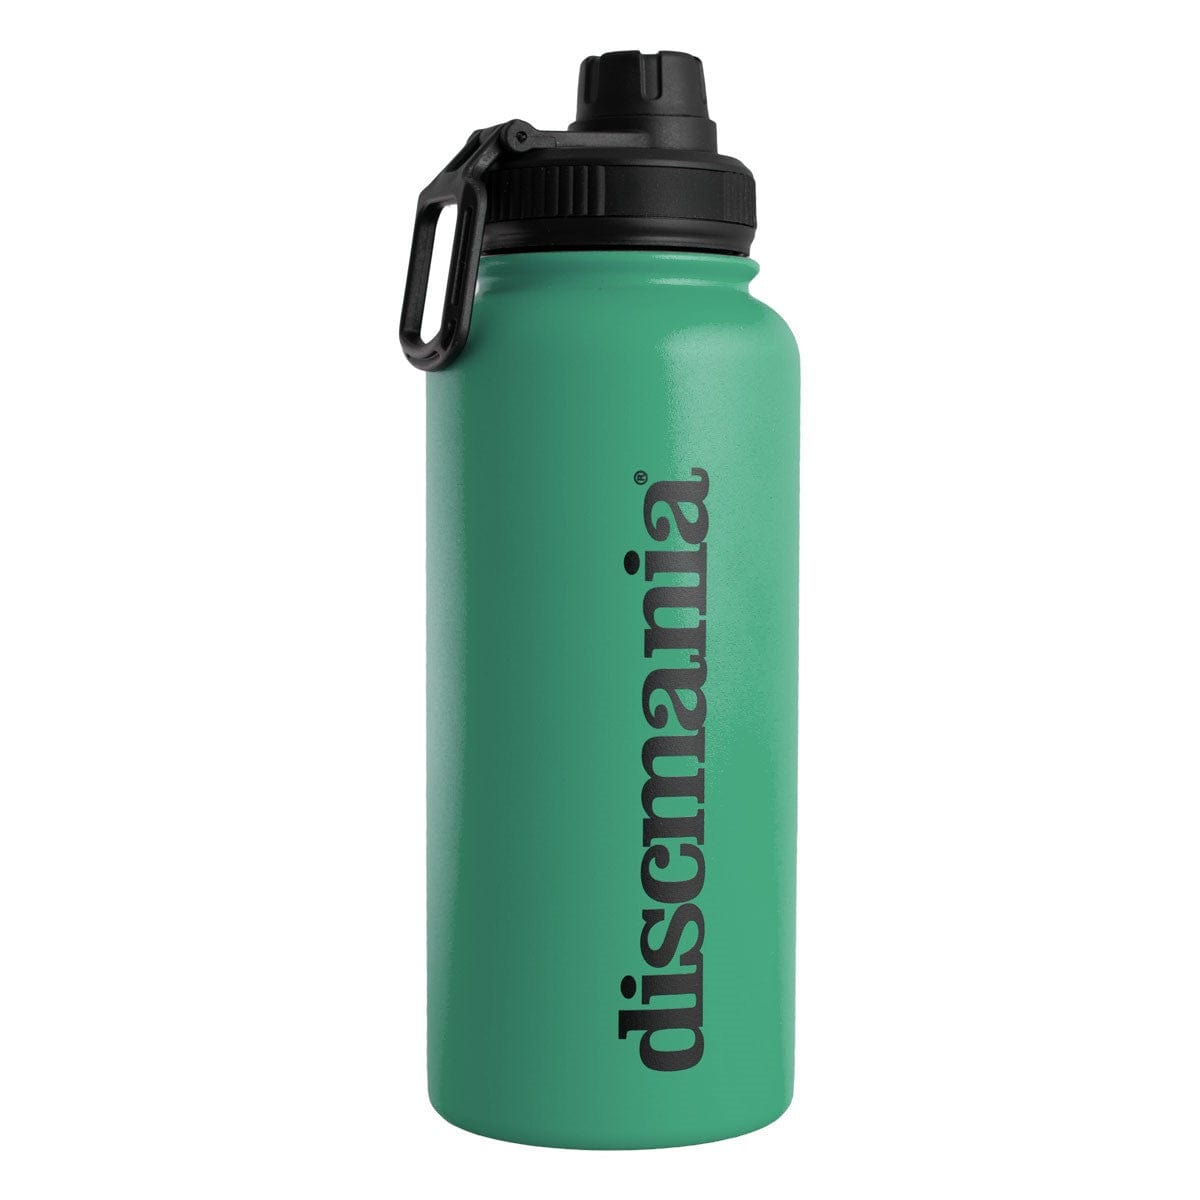 Discmania Accessory Green Discmania Logo 32 oz. Stainless Steel Insulated Arctic Flask